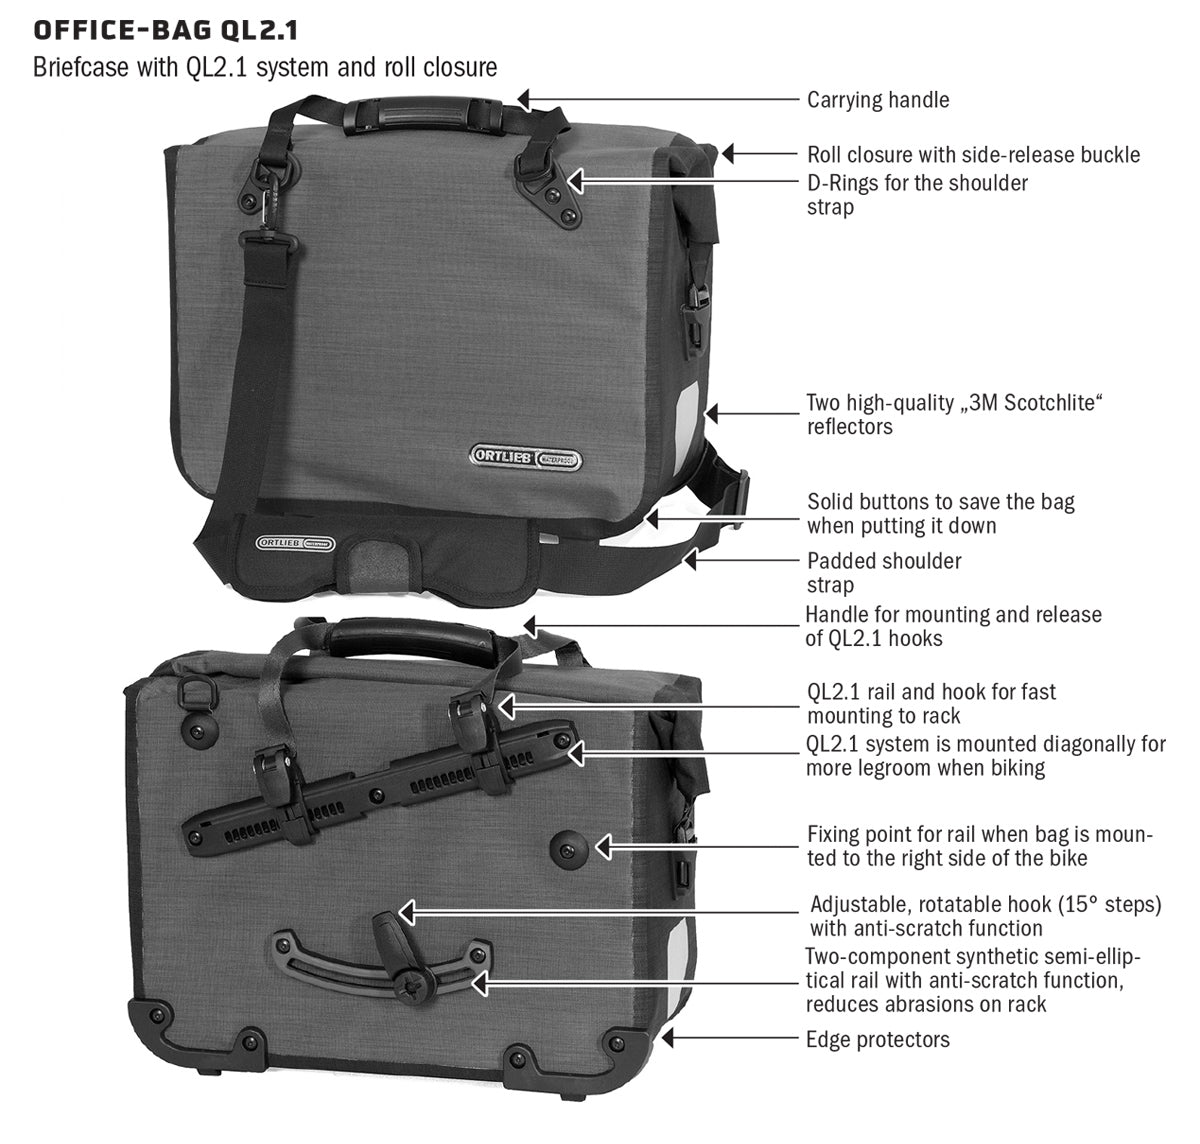 Ortlieb Office Bag Features Overview